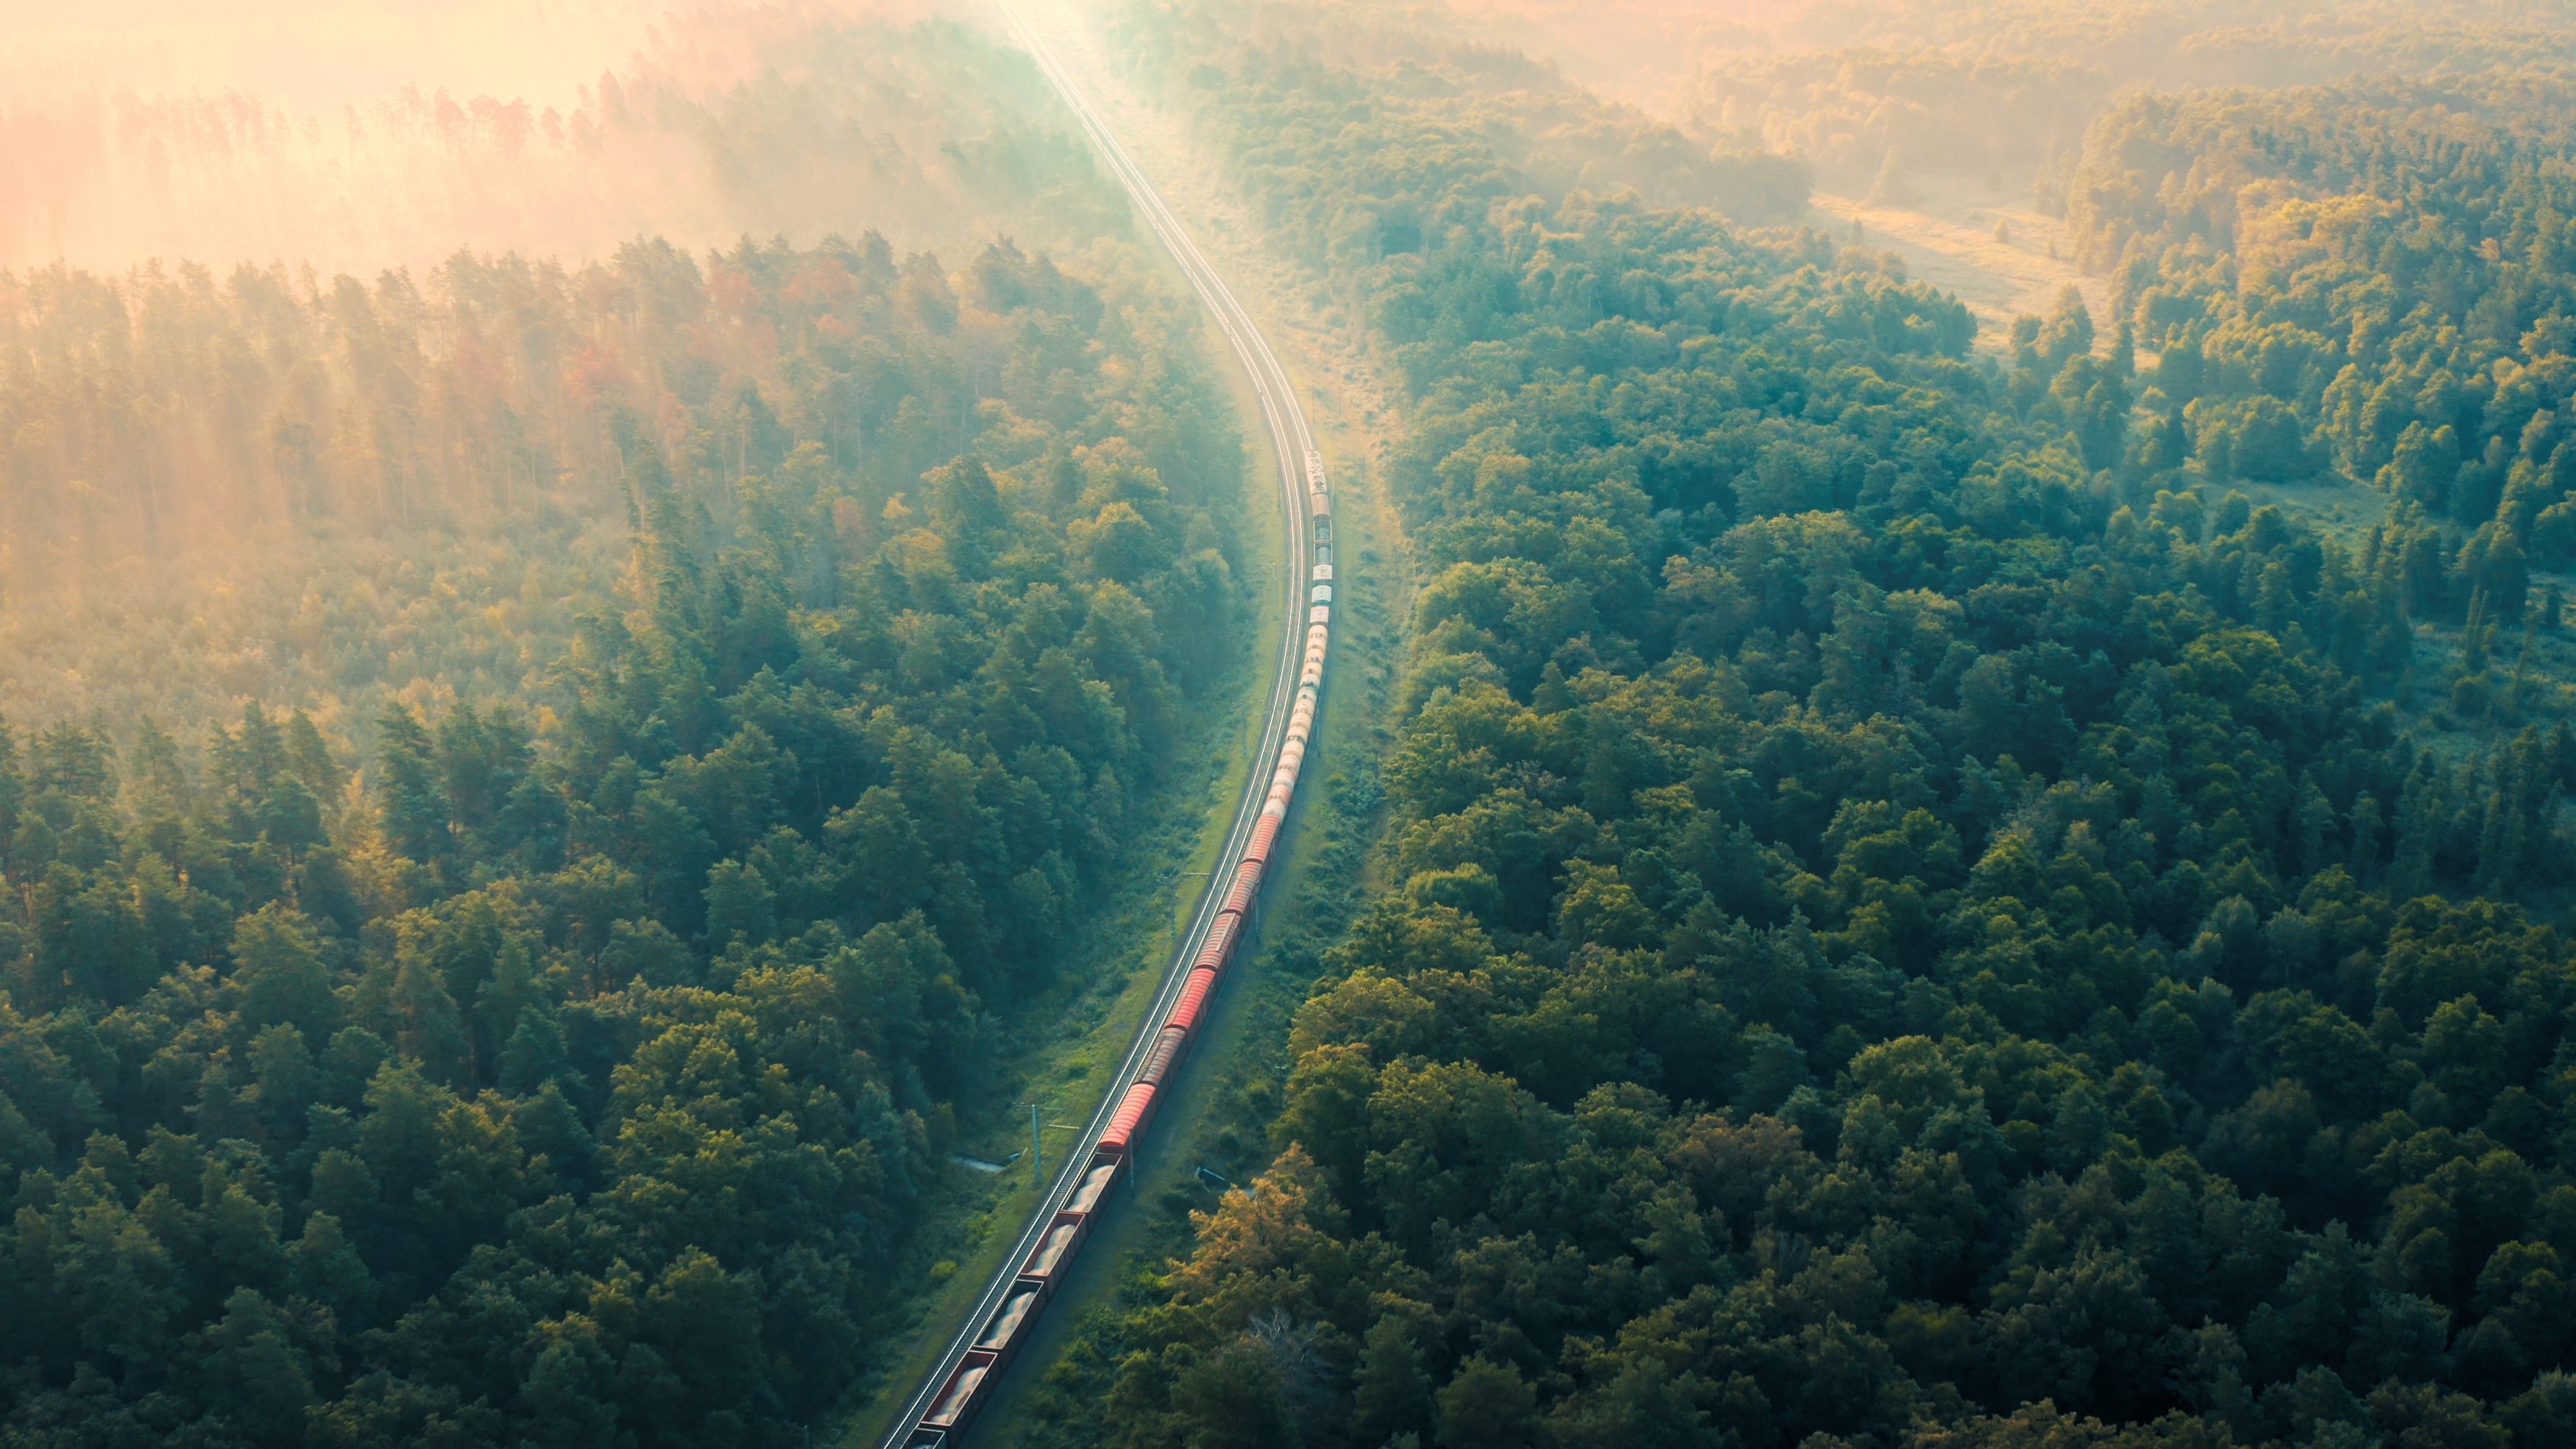 An aerial photograph showing a freight train traveling through a thick forest amid some fog.